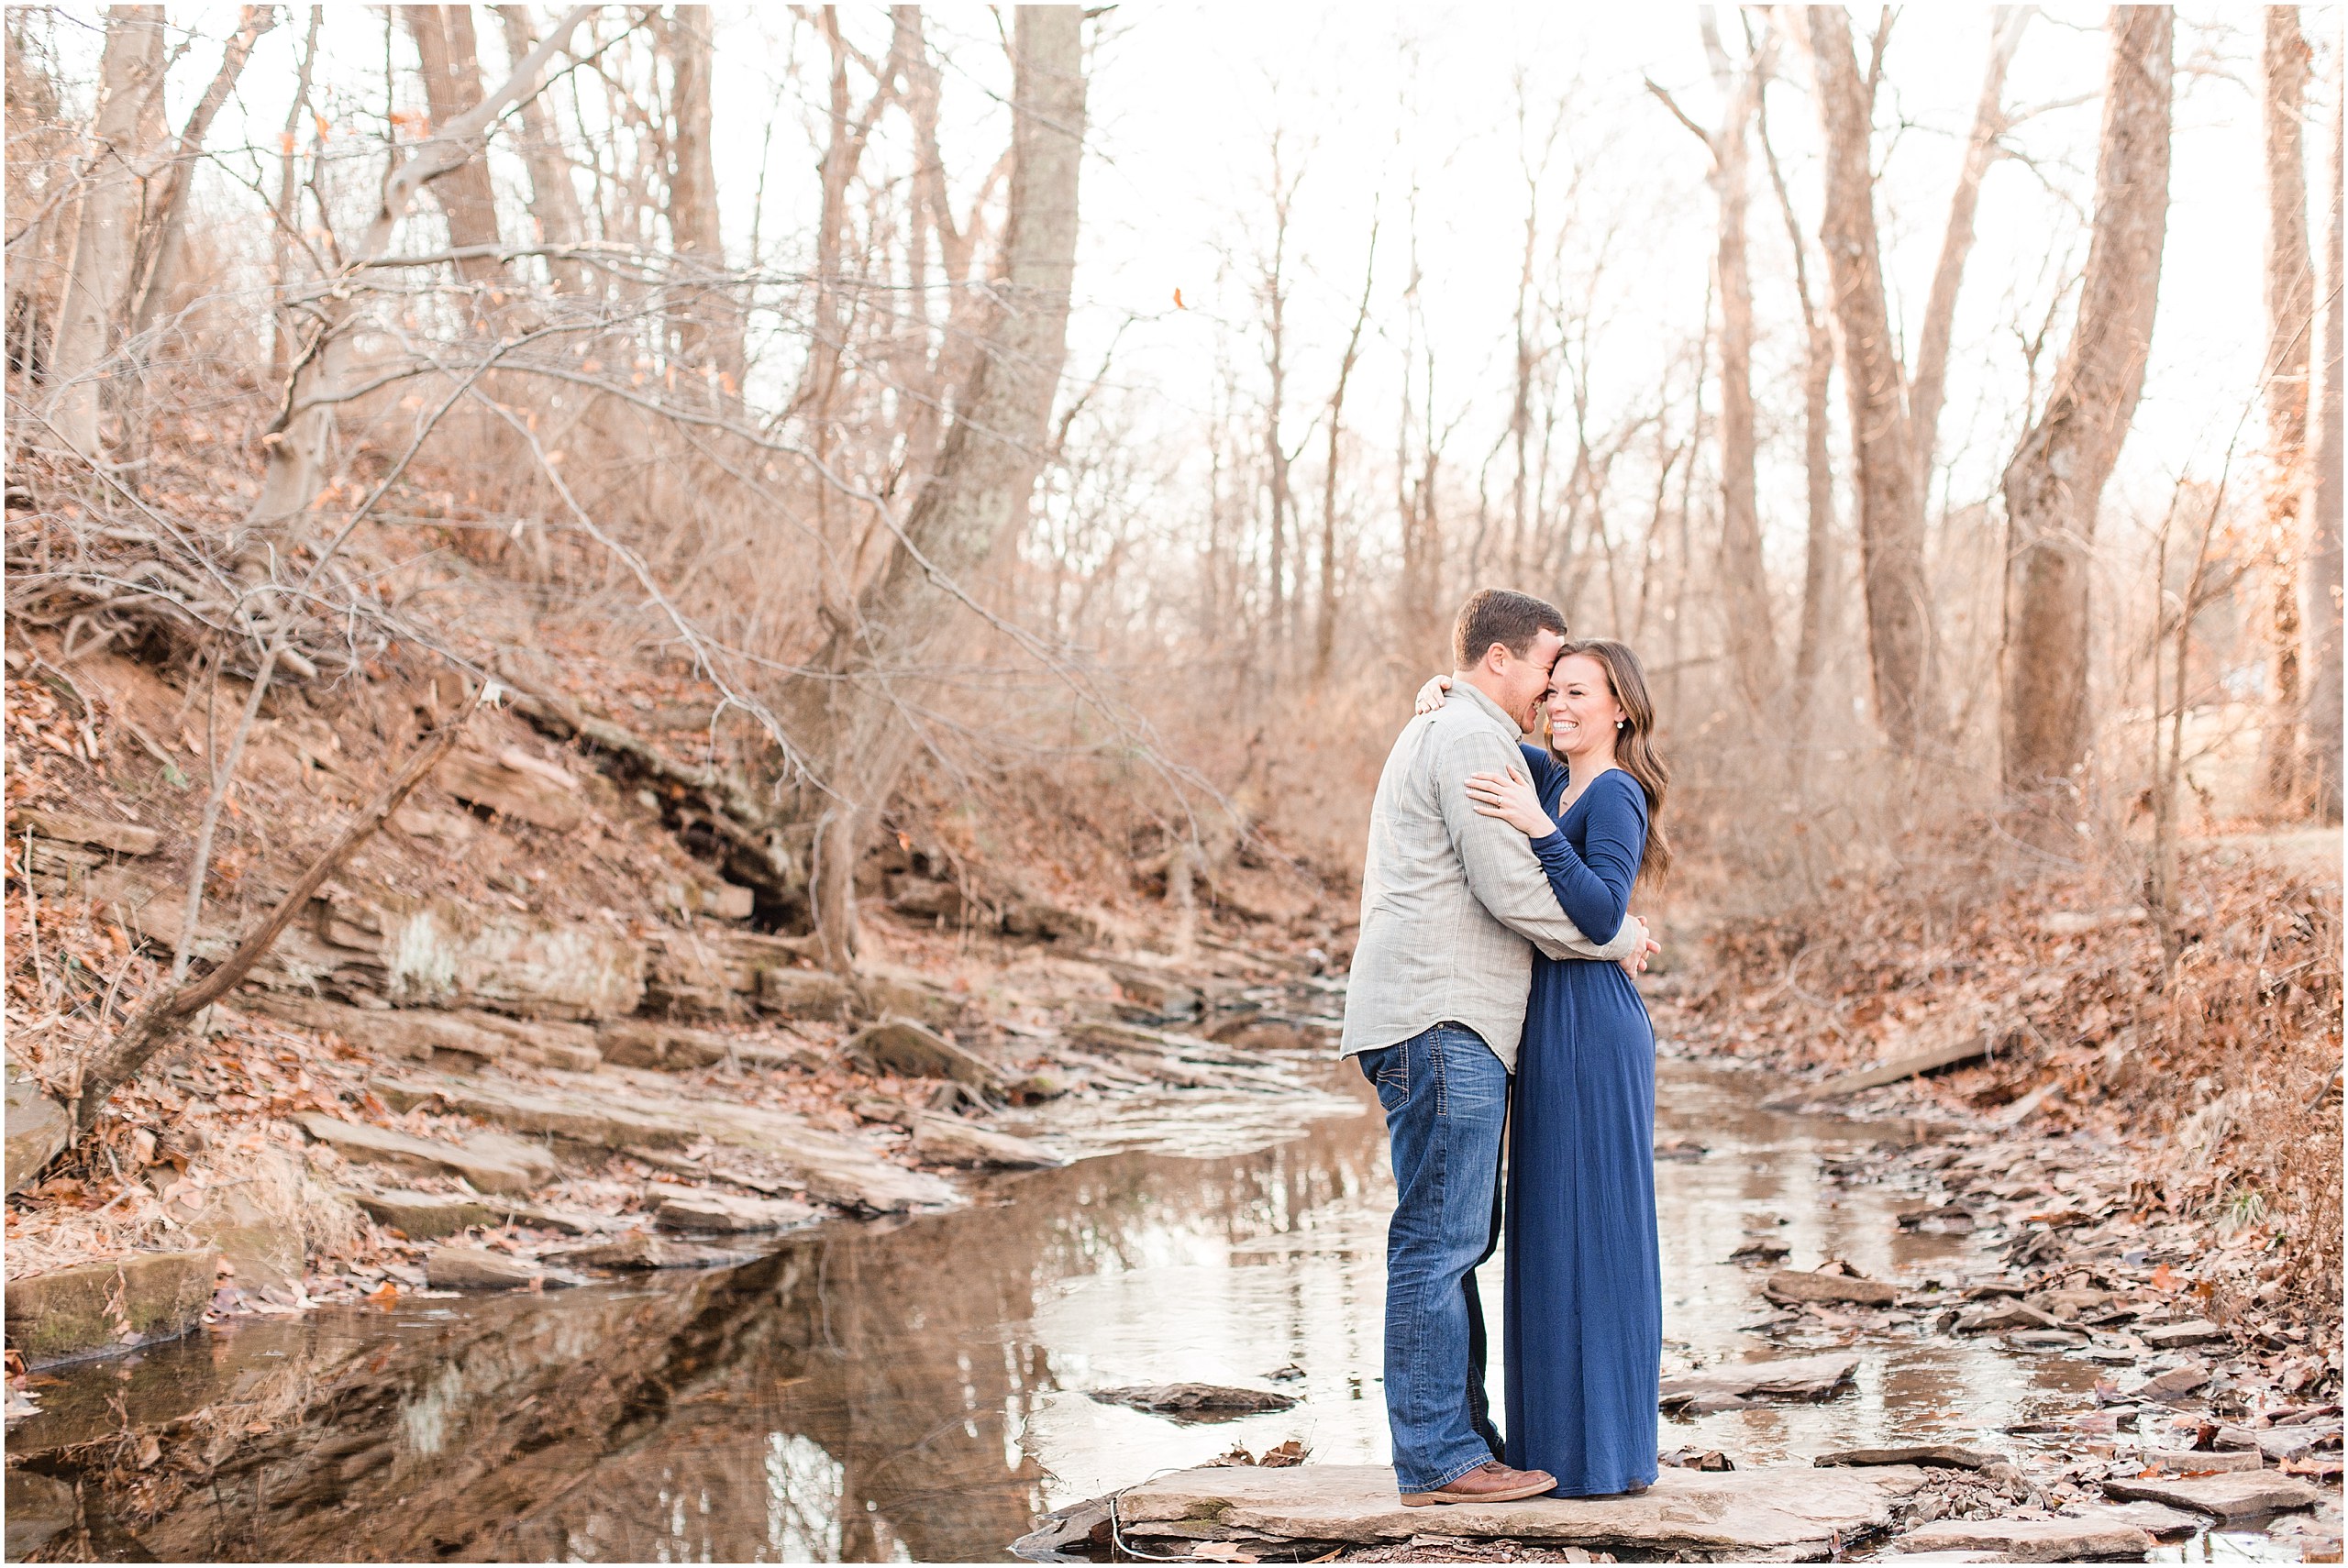 Richie & Kati's Winter Engagement at The Barn On Bridge in Collegeville, PA Photos